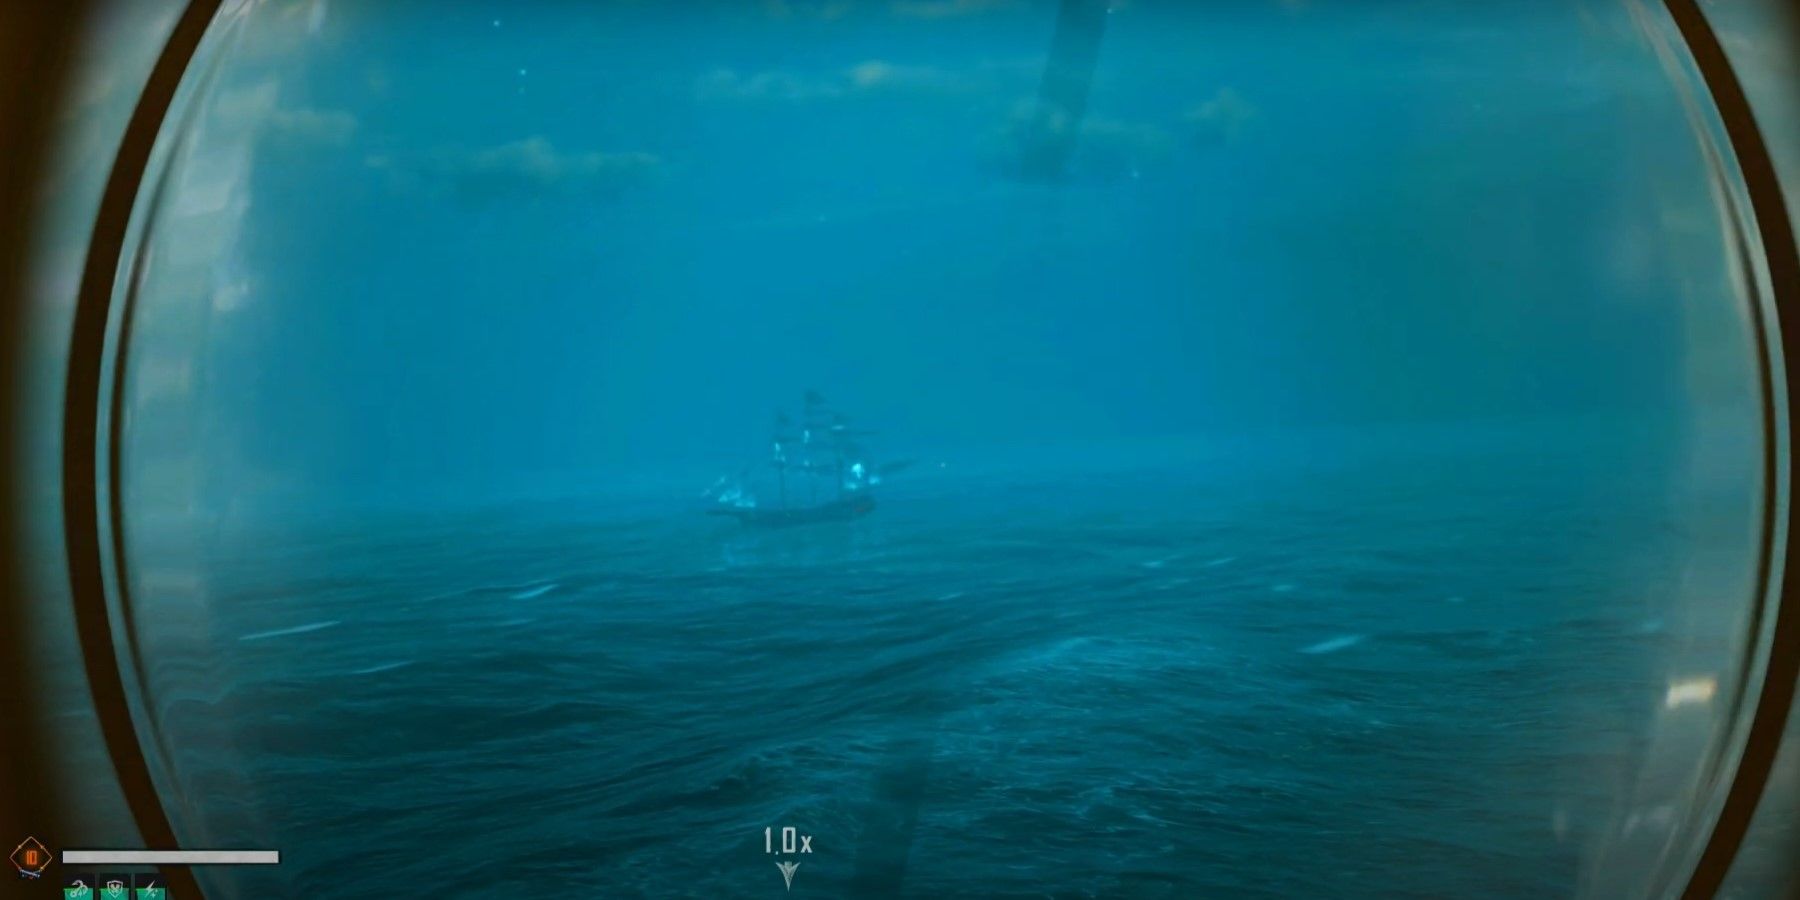 The Skull And Bones character found the Maangodin Ghost Ship emerging from the fog in the middle of the sea.